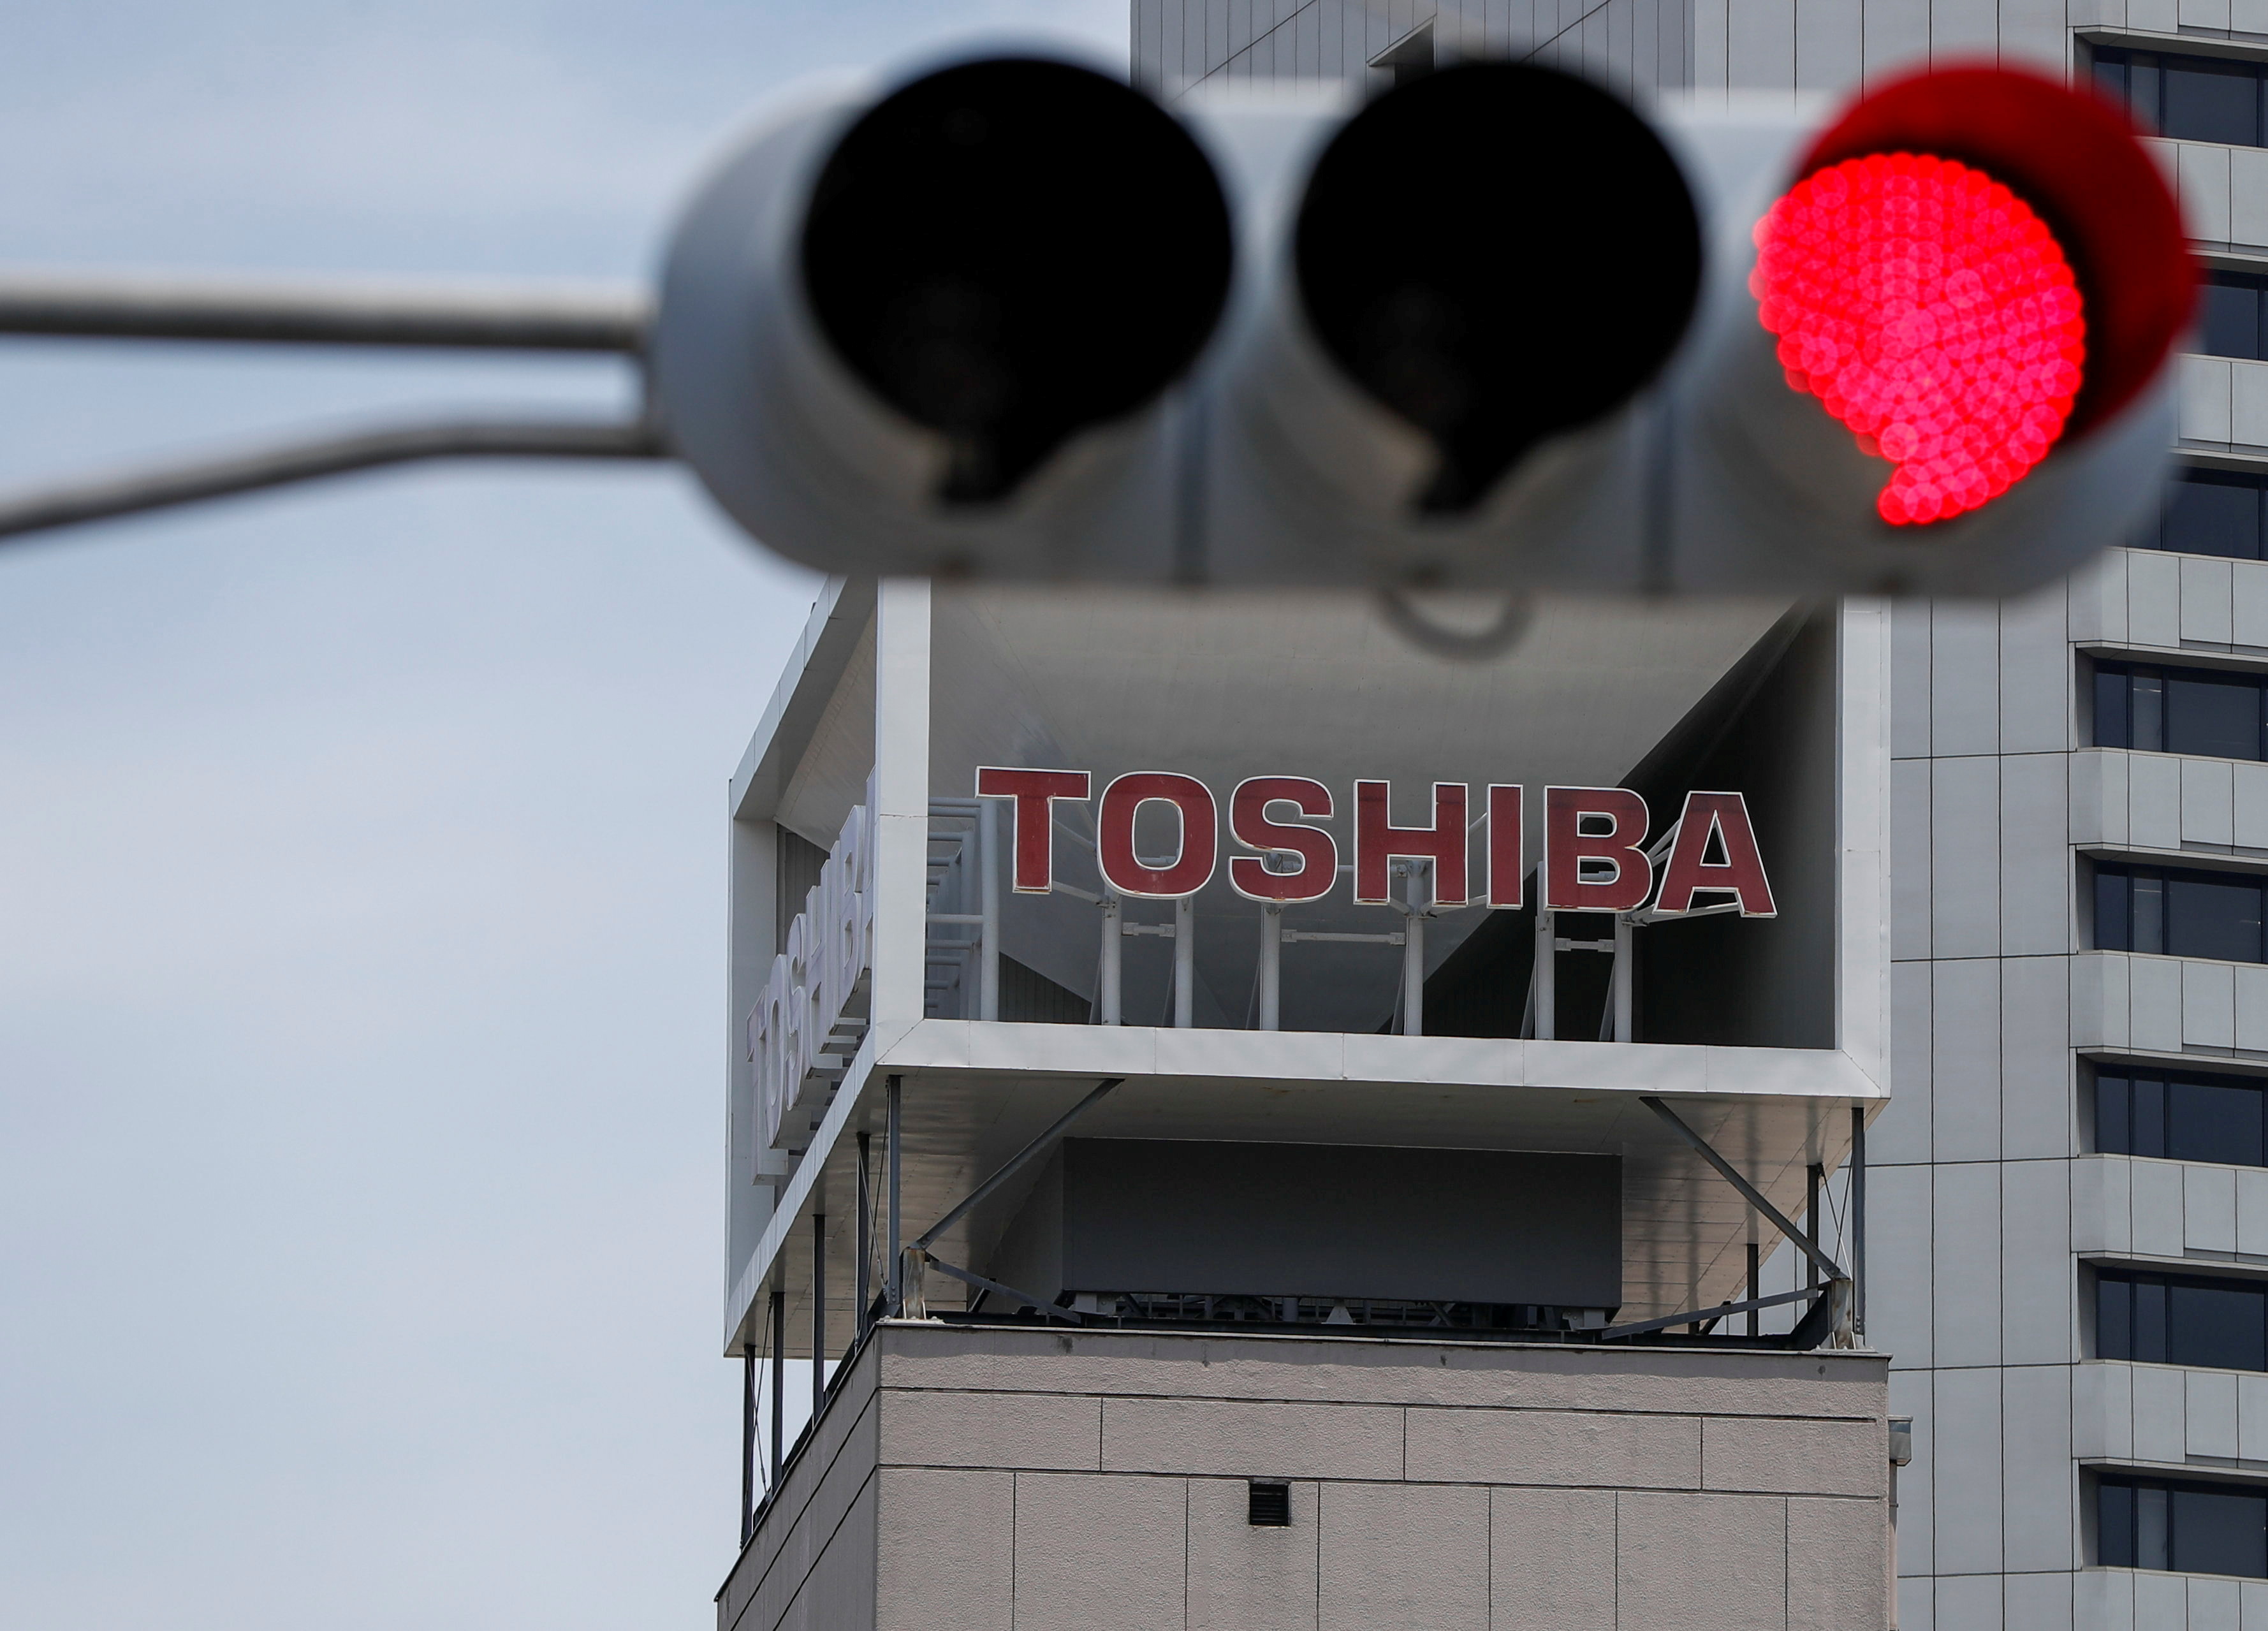 The logo of Toshiba Corp. is seen next to a traffic signal atop of a building in Tokyo